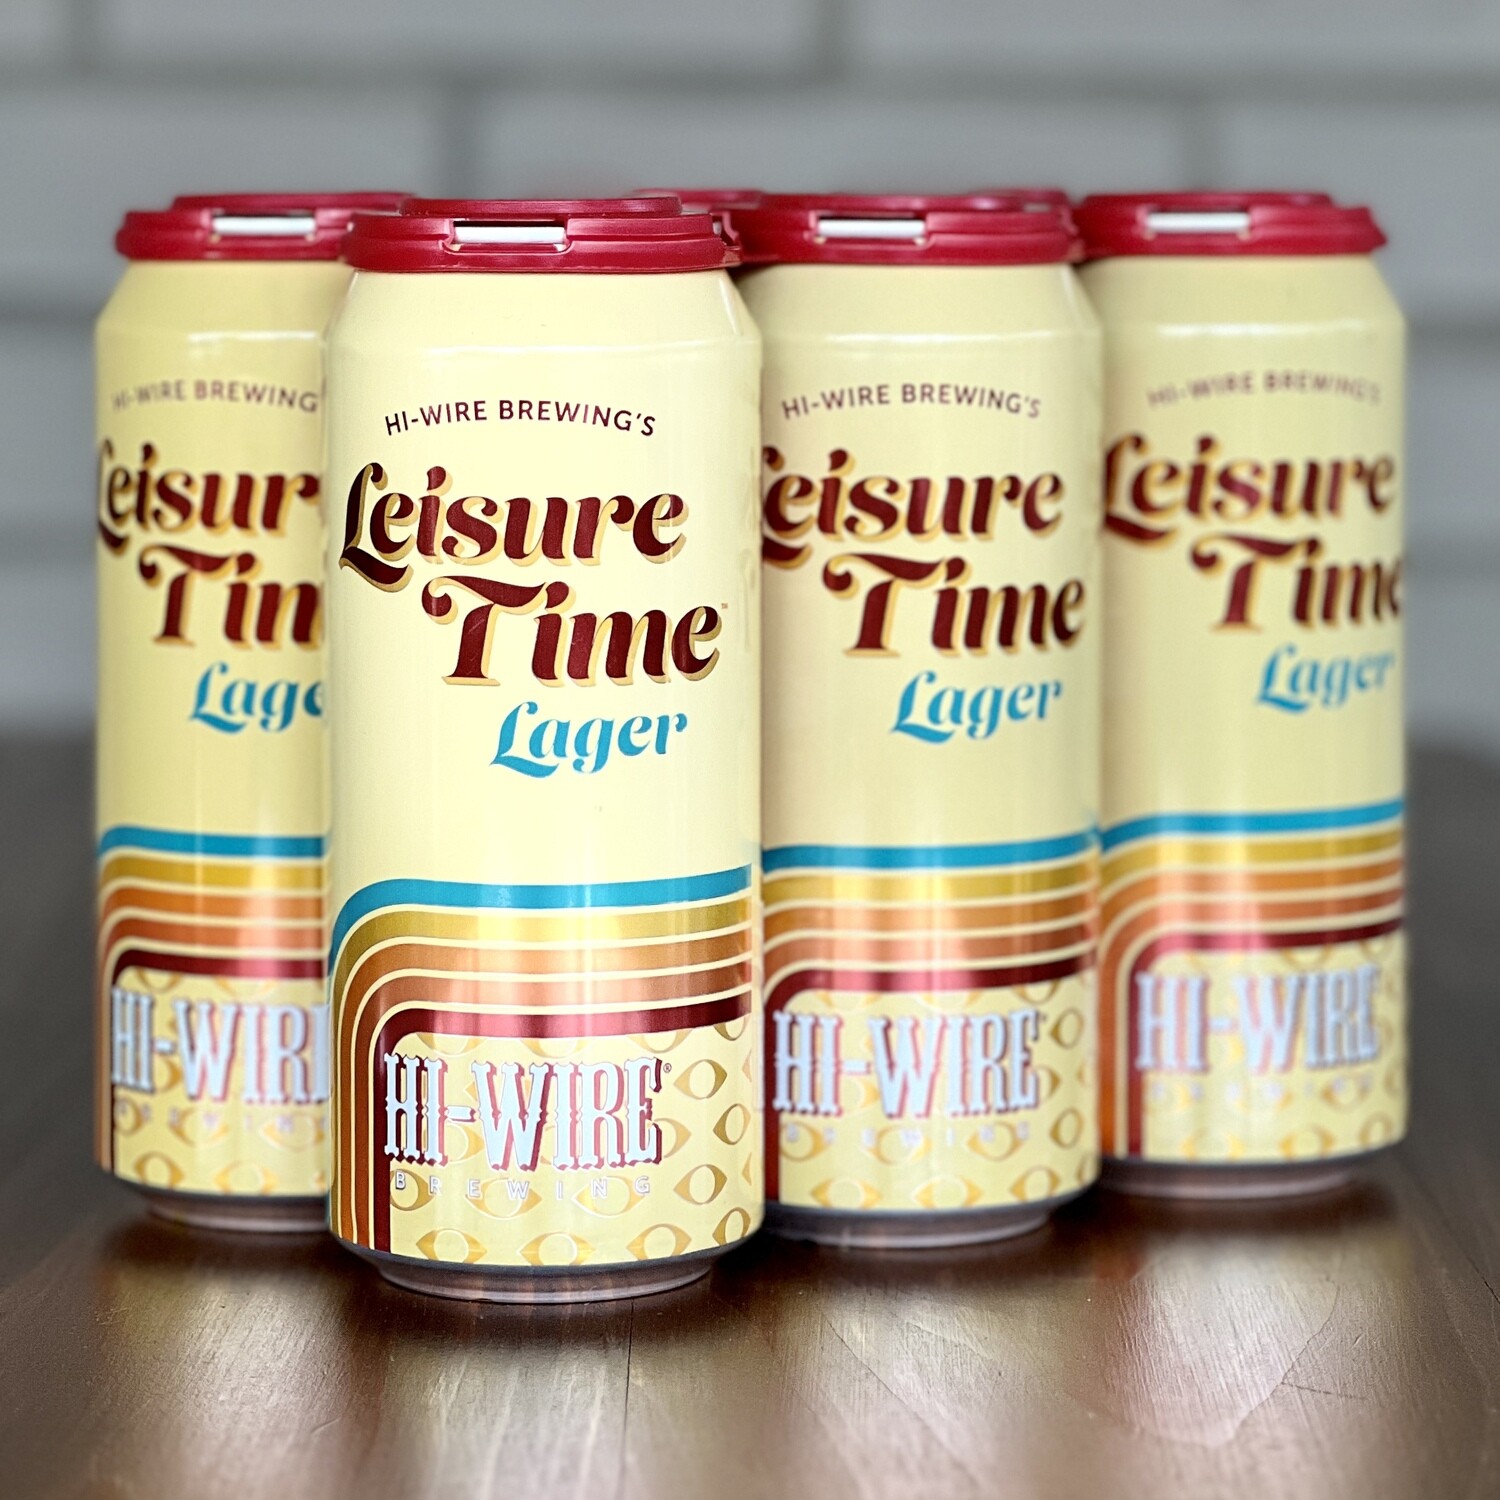 Hi-Wire Leisure Time Lager (6pk)